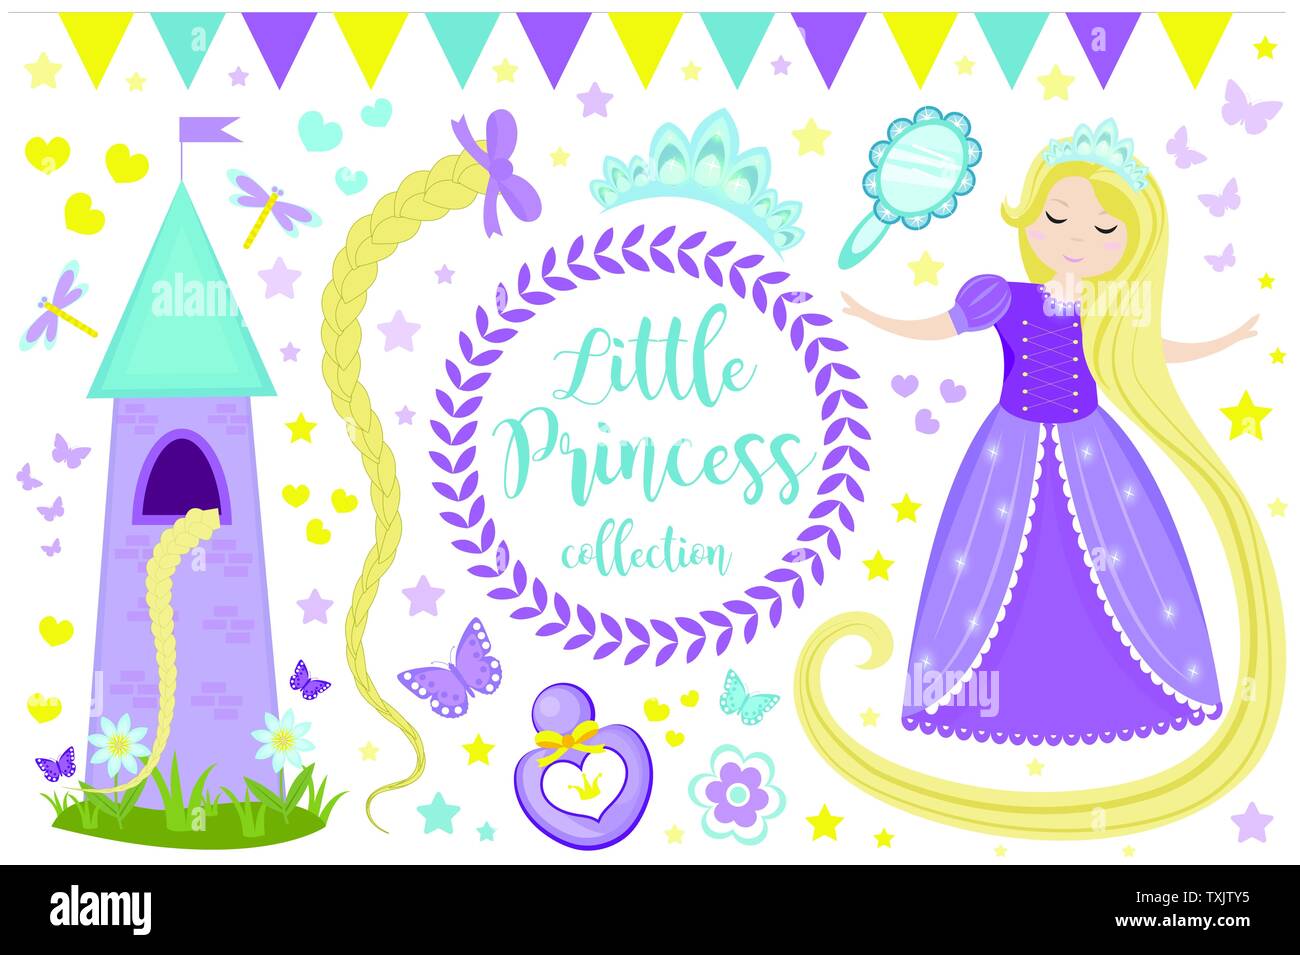 Cute little princess Rapunzel set objects. Collection design element with pretty girl, tower, butterfly, accessories. Kids baby clip art funny smiling Stock Vector